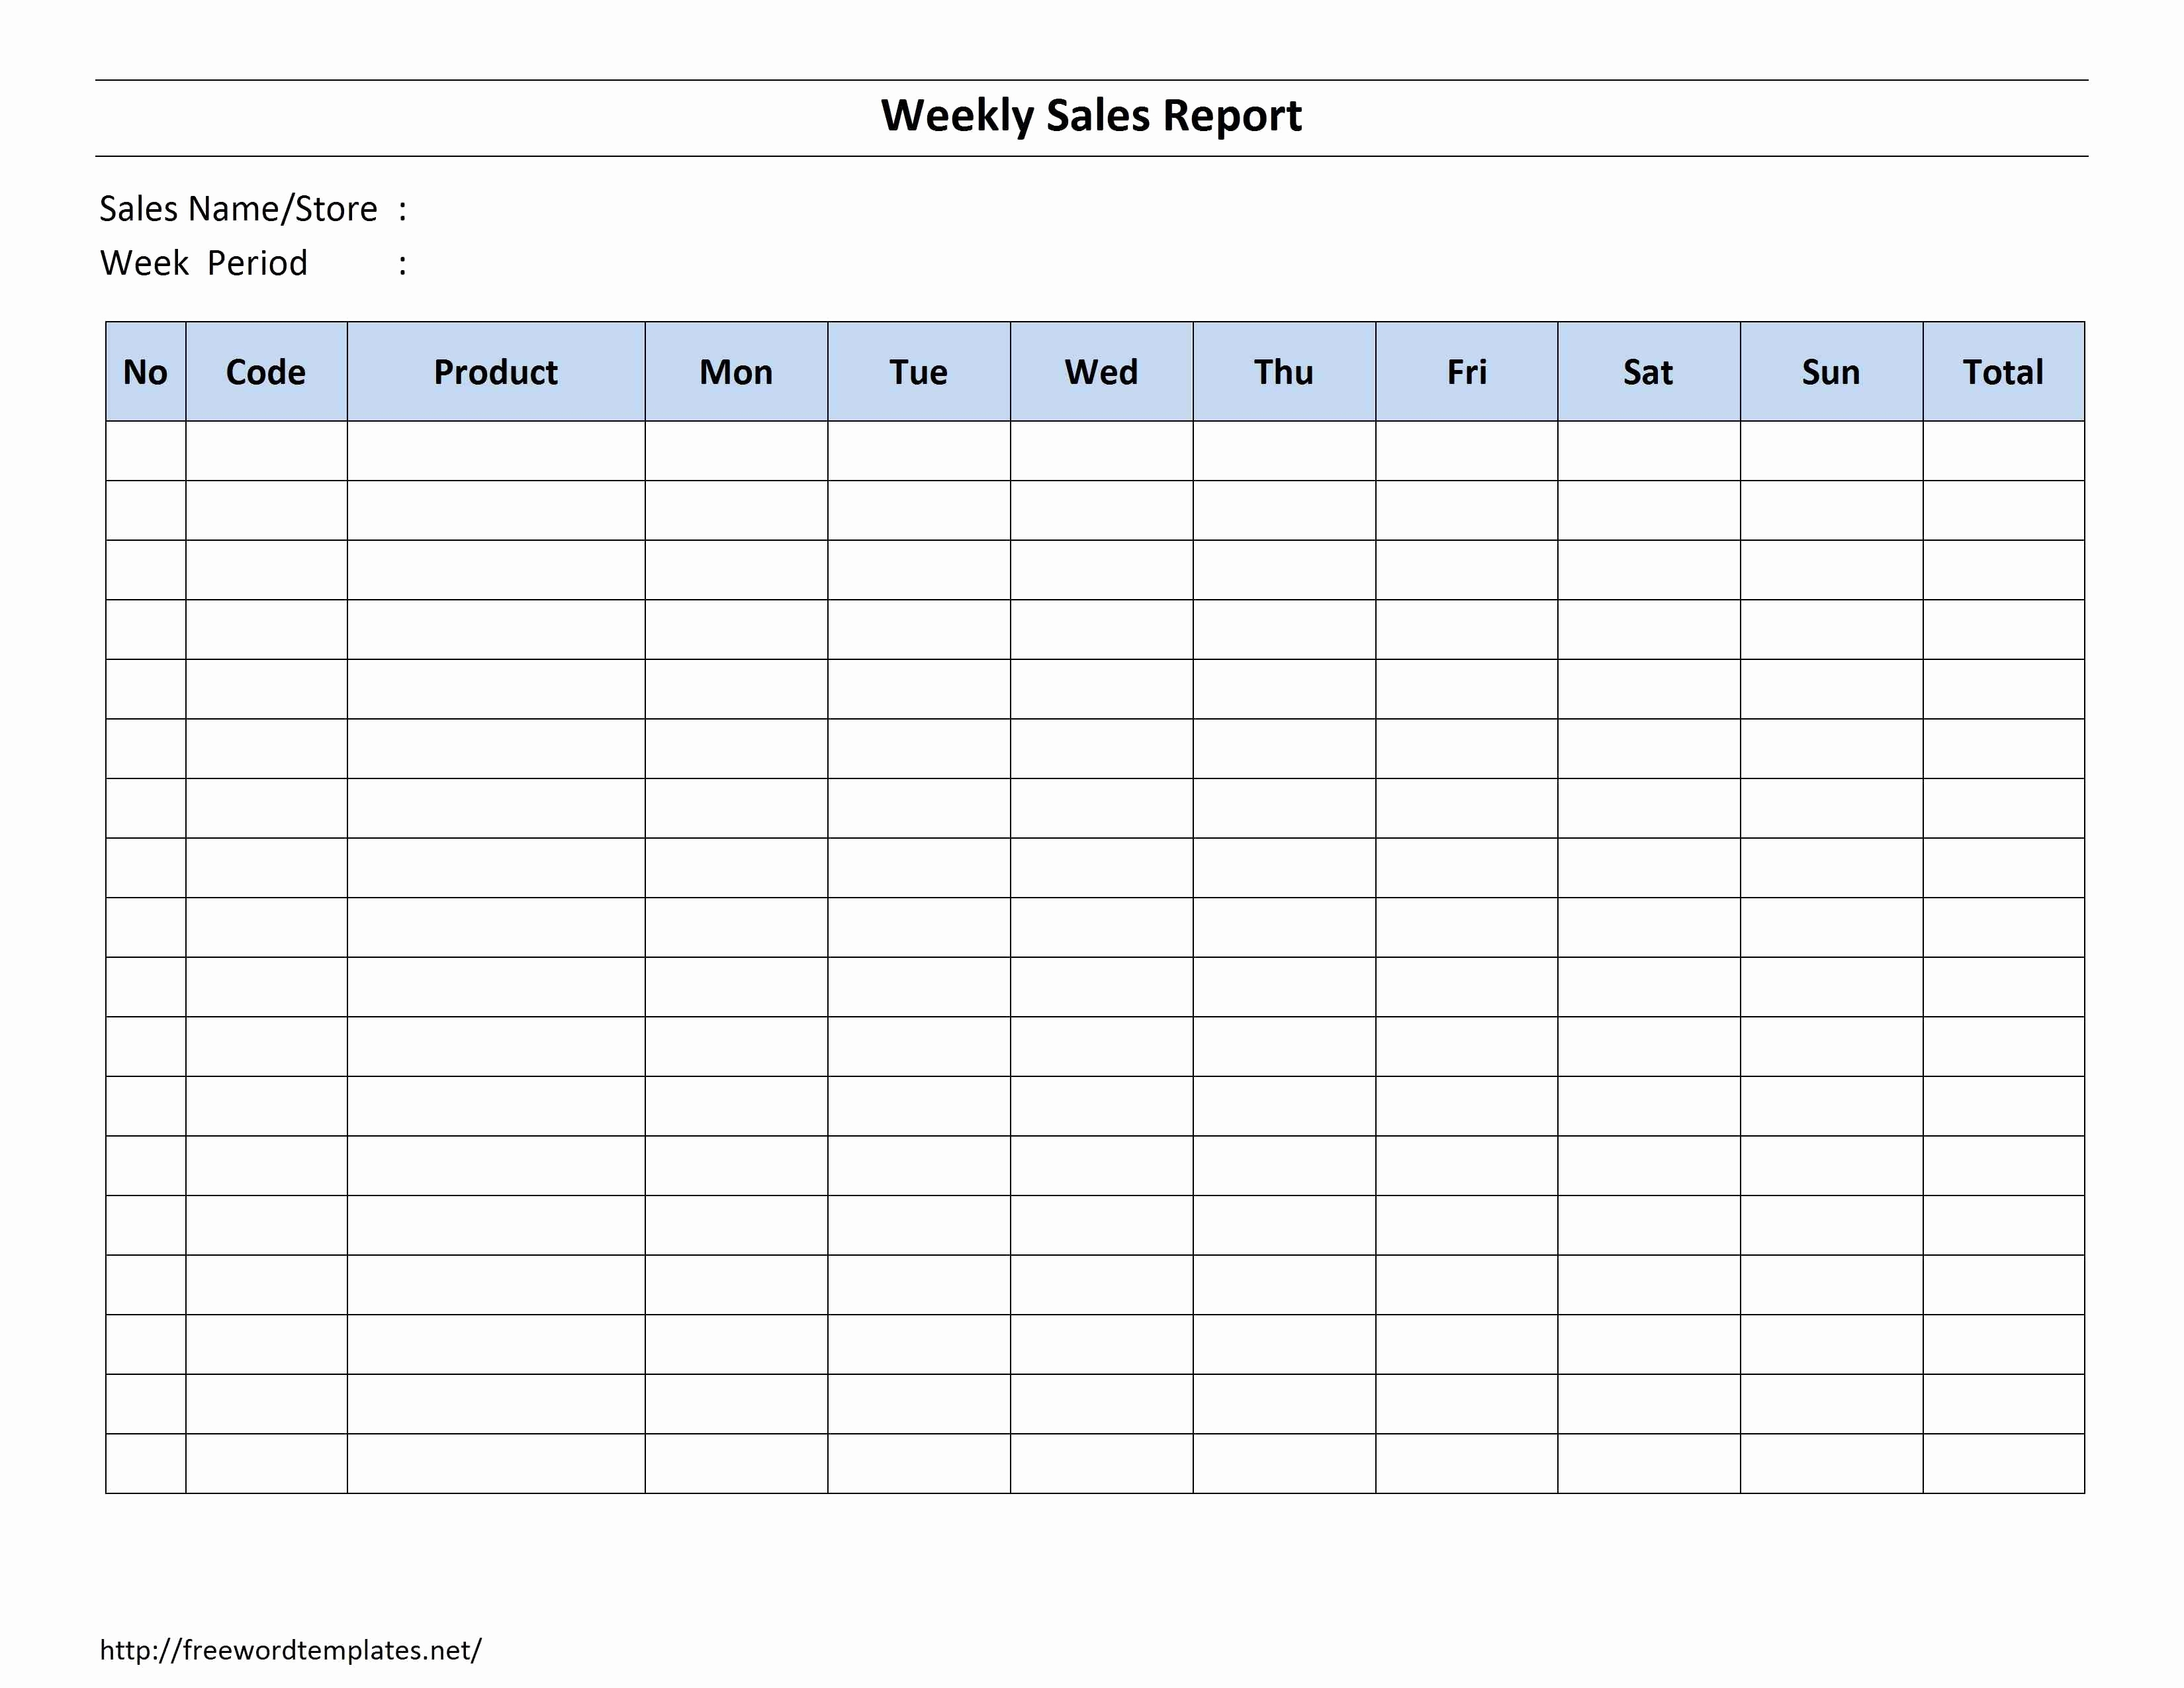 Sales Call Tracking Spreadsheet On Excel Spreadsheet Project And Tracking Sales Calls Spreadsheet